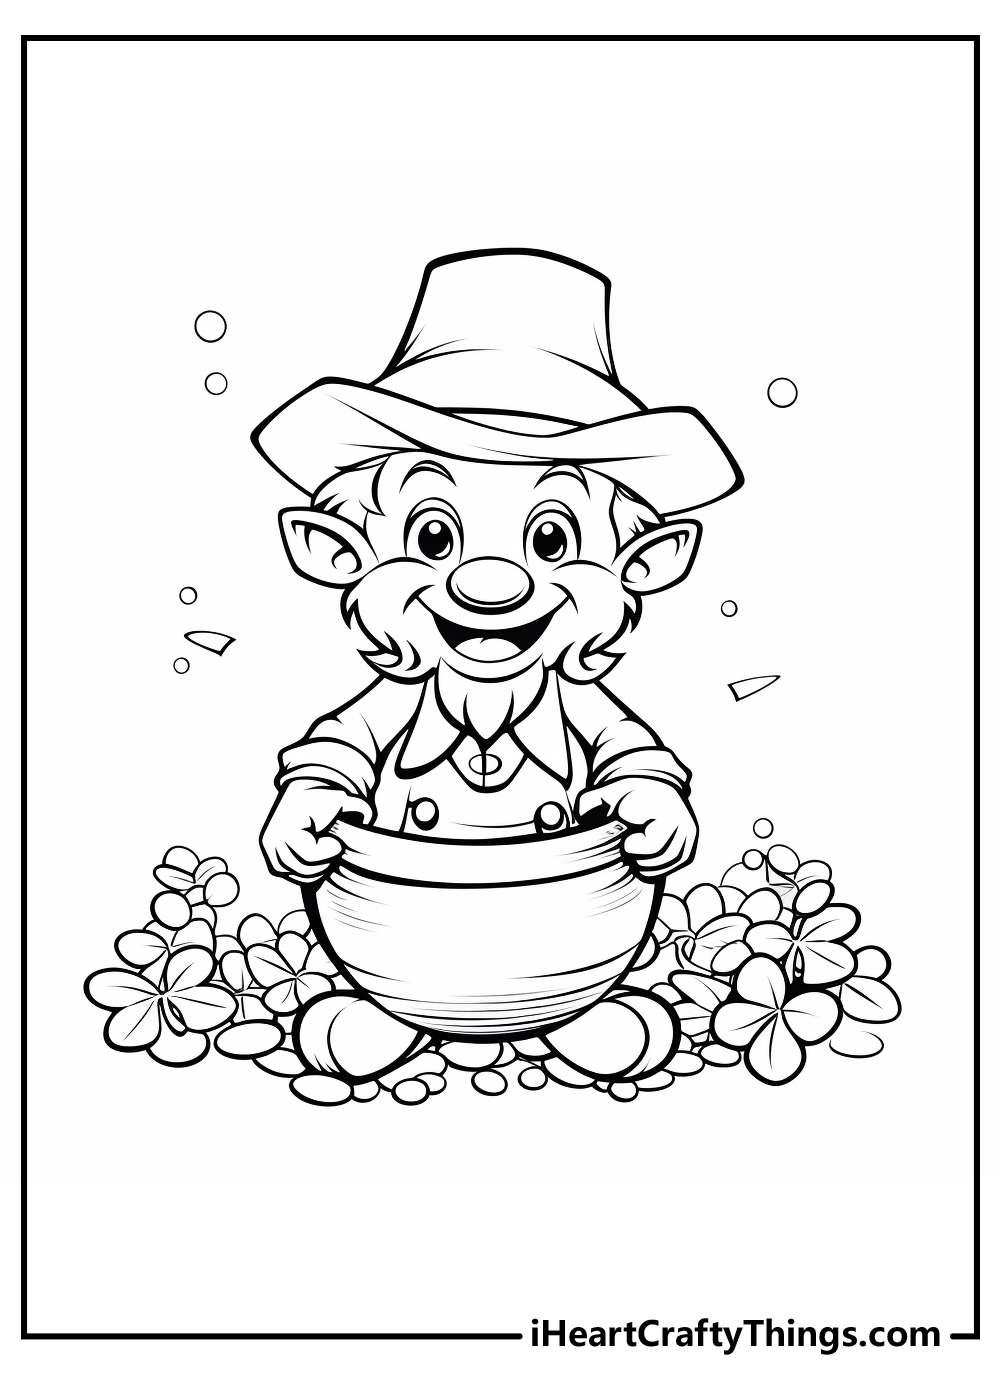 Leprechaun Coloring Pages for kids